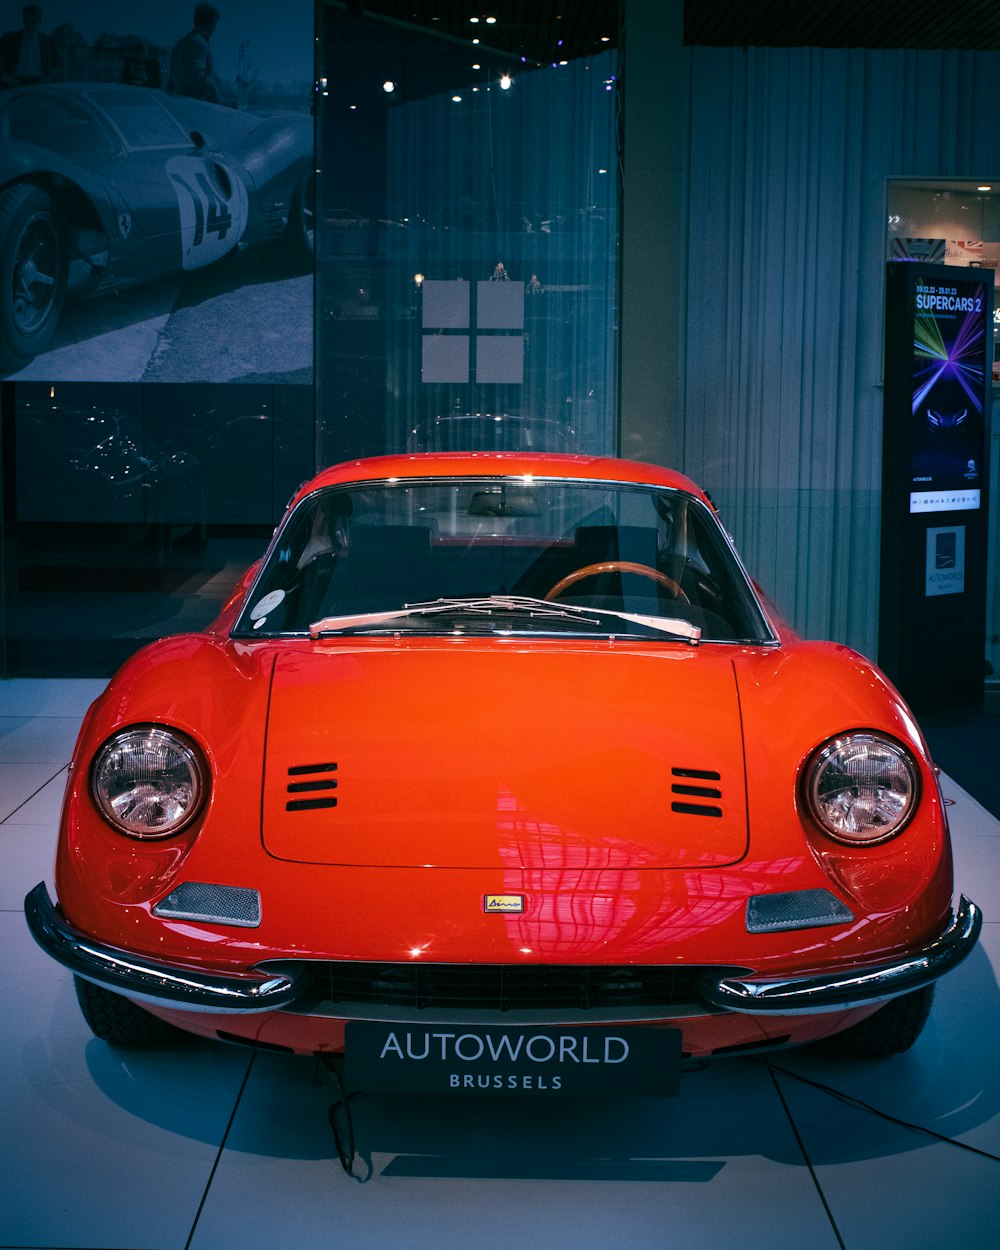 an orange sports car on display in a museum